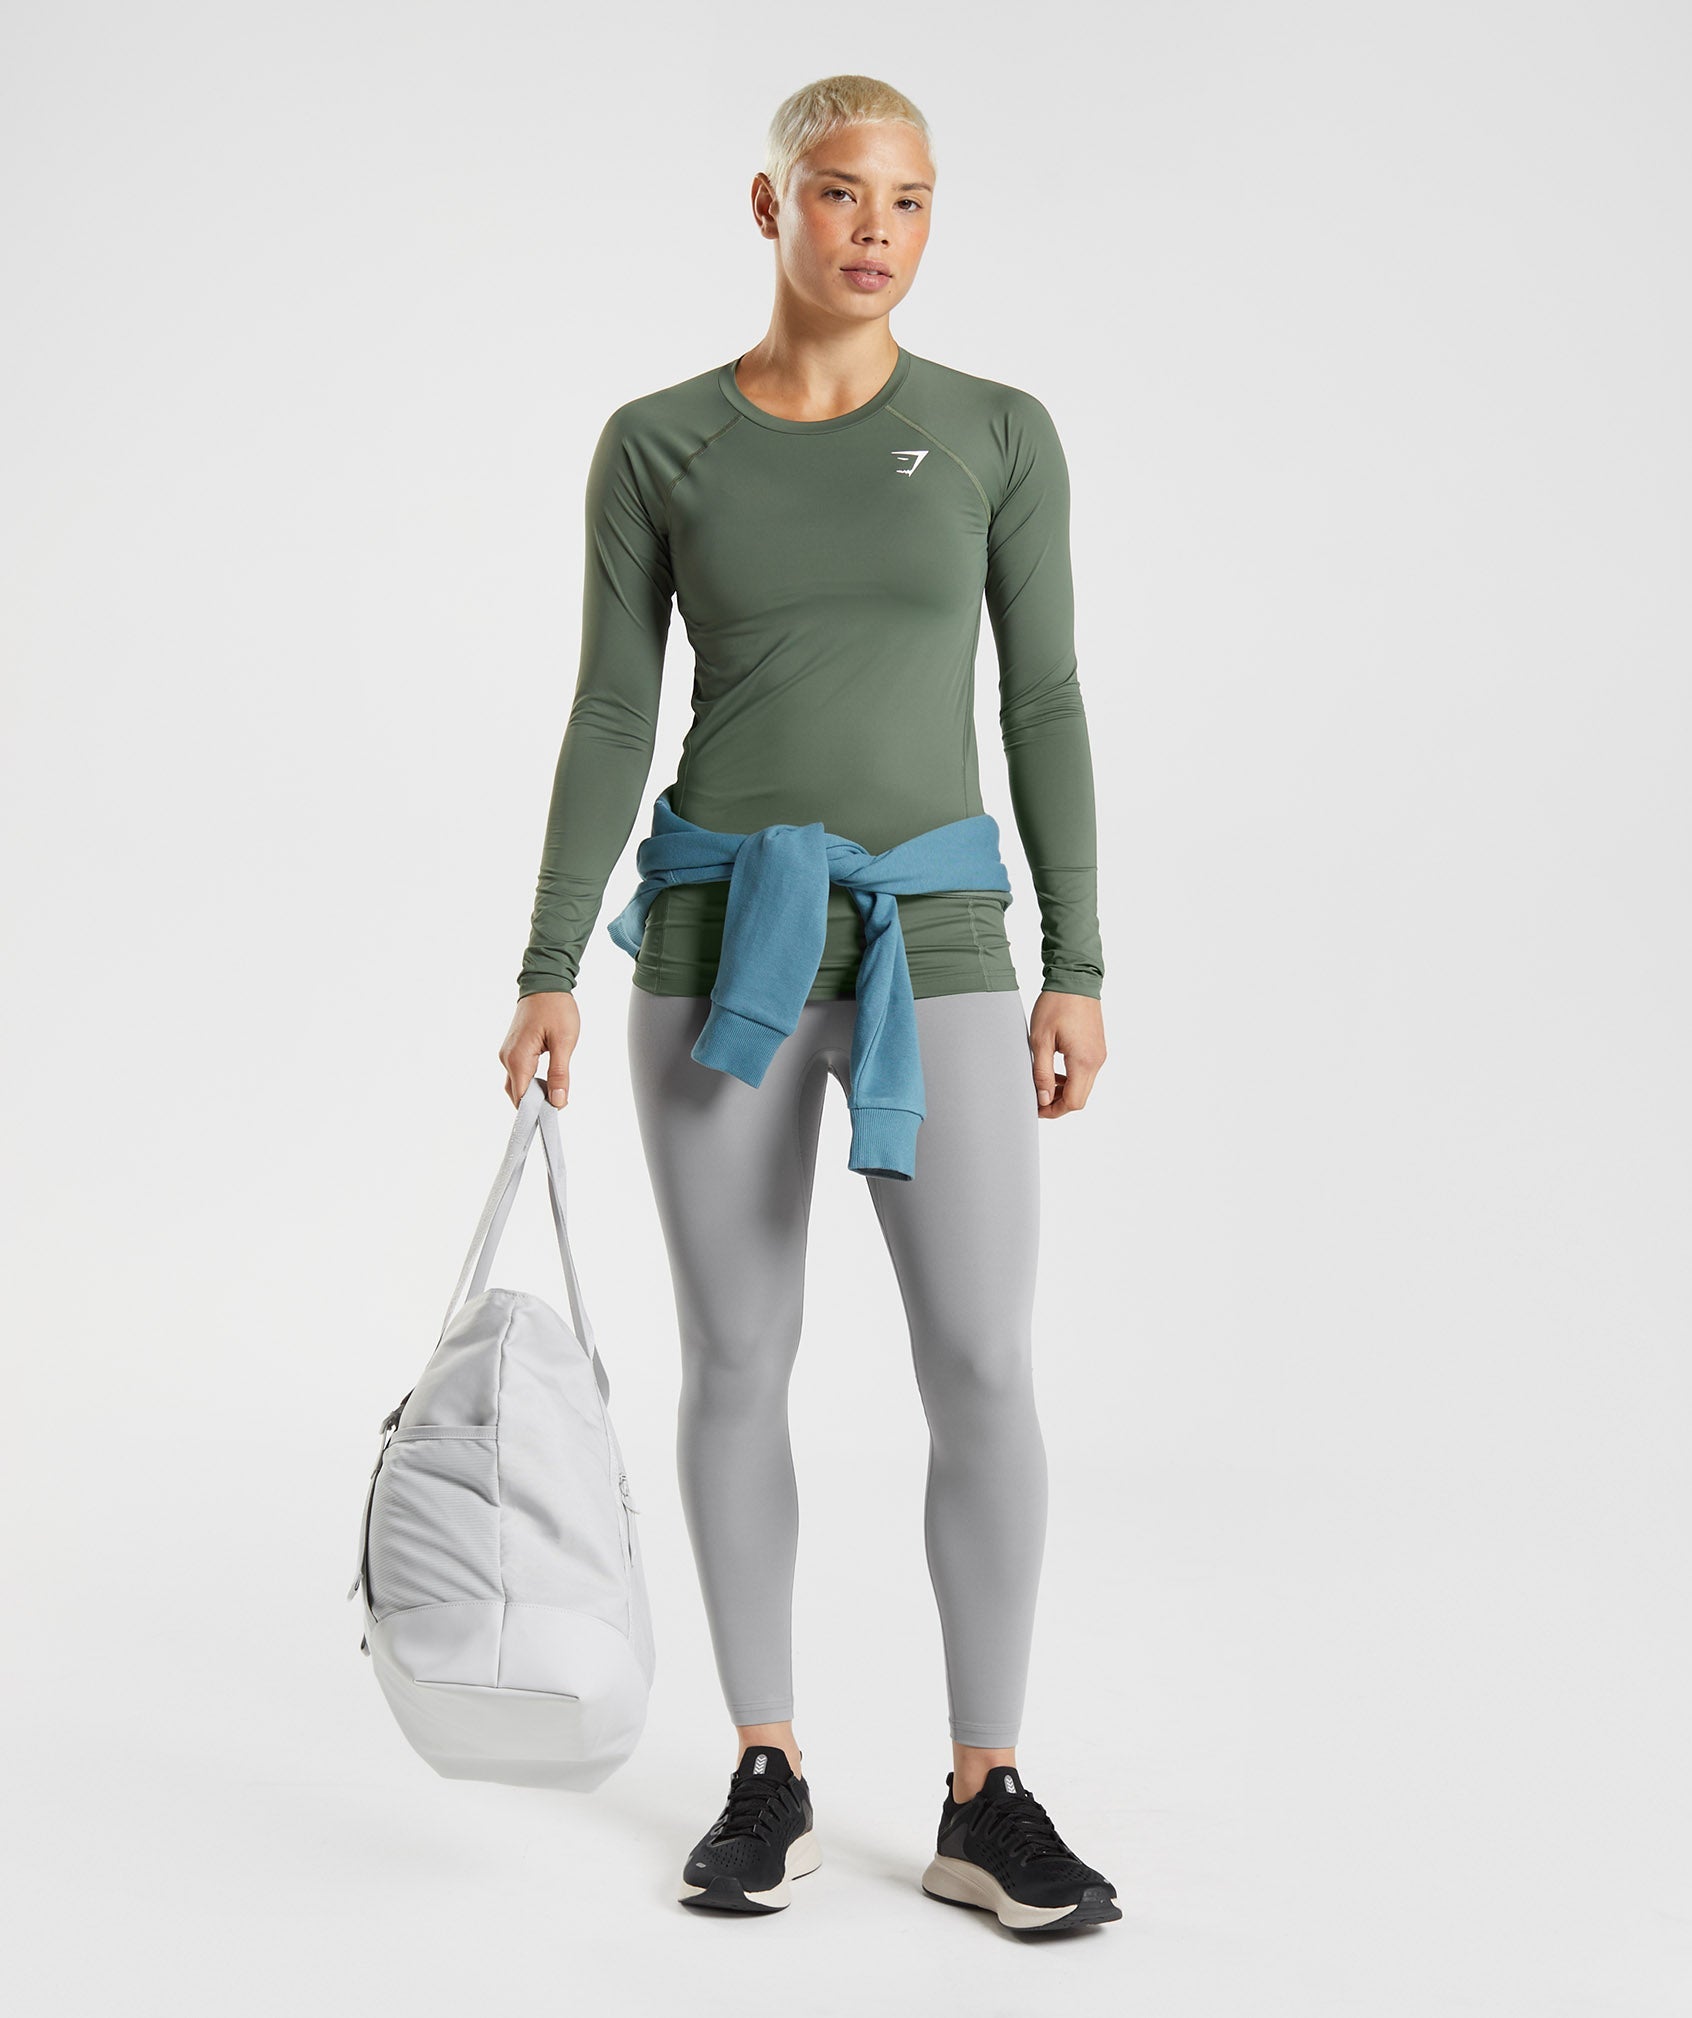 Training Baselayer Long Sleeve Top in Core Olive